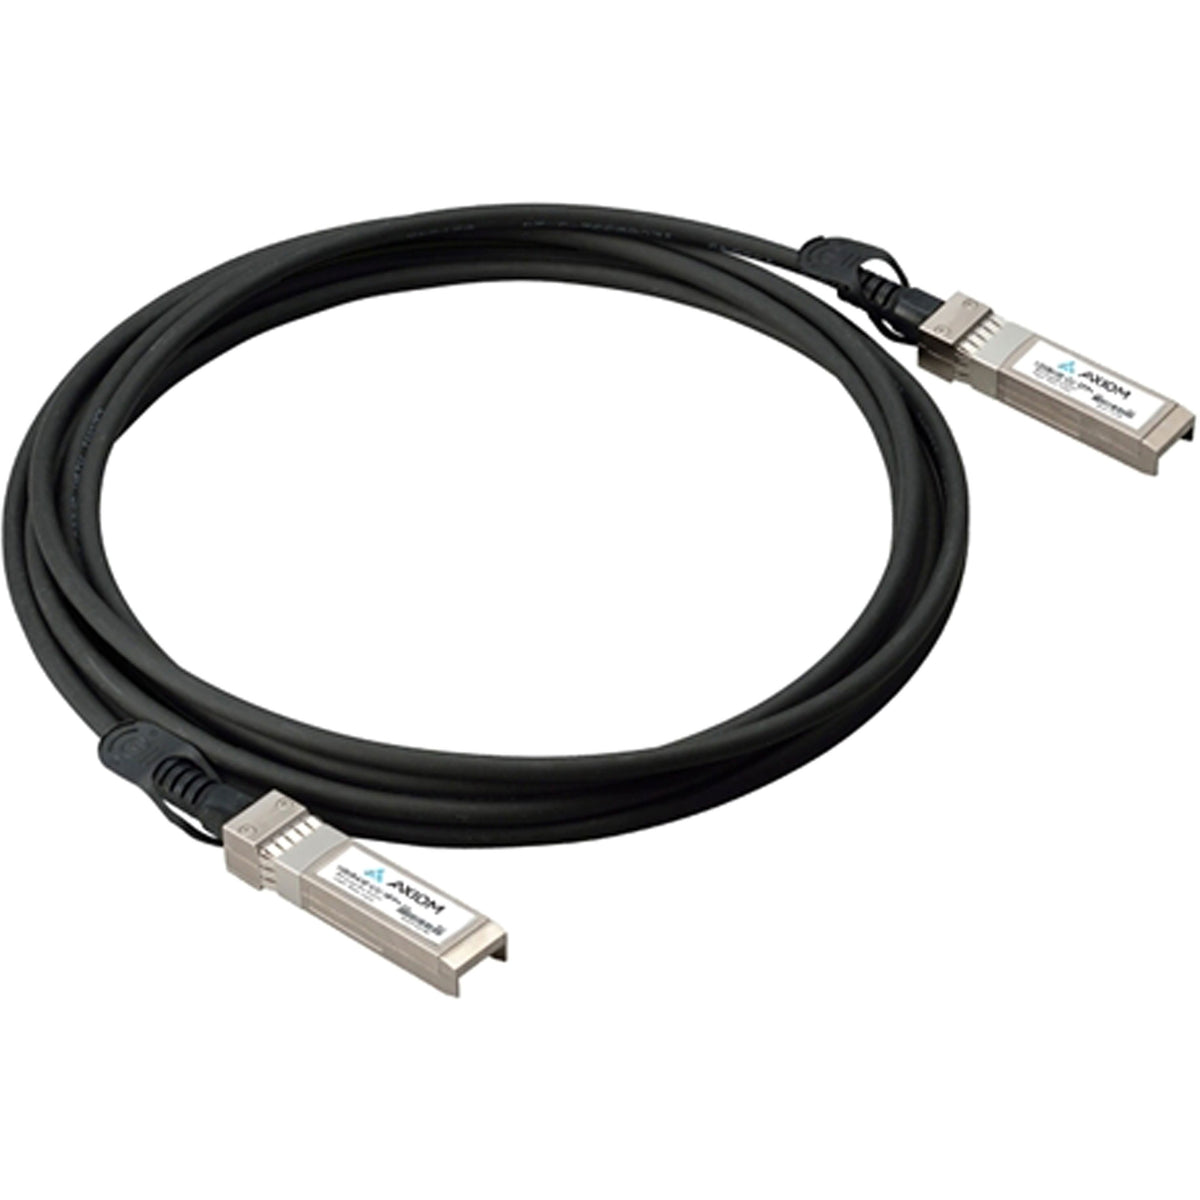 Axiom 10GBASE-CU SFP+ Passive DAC Cable for Palo Alto 5m - PAN-SFP-PLUS-CU5M - PAN-SFP-PLUS-CU5M-AX